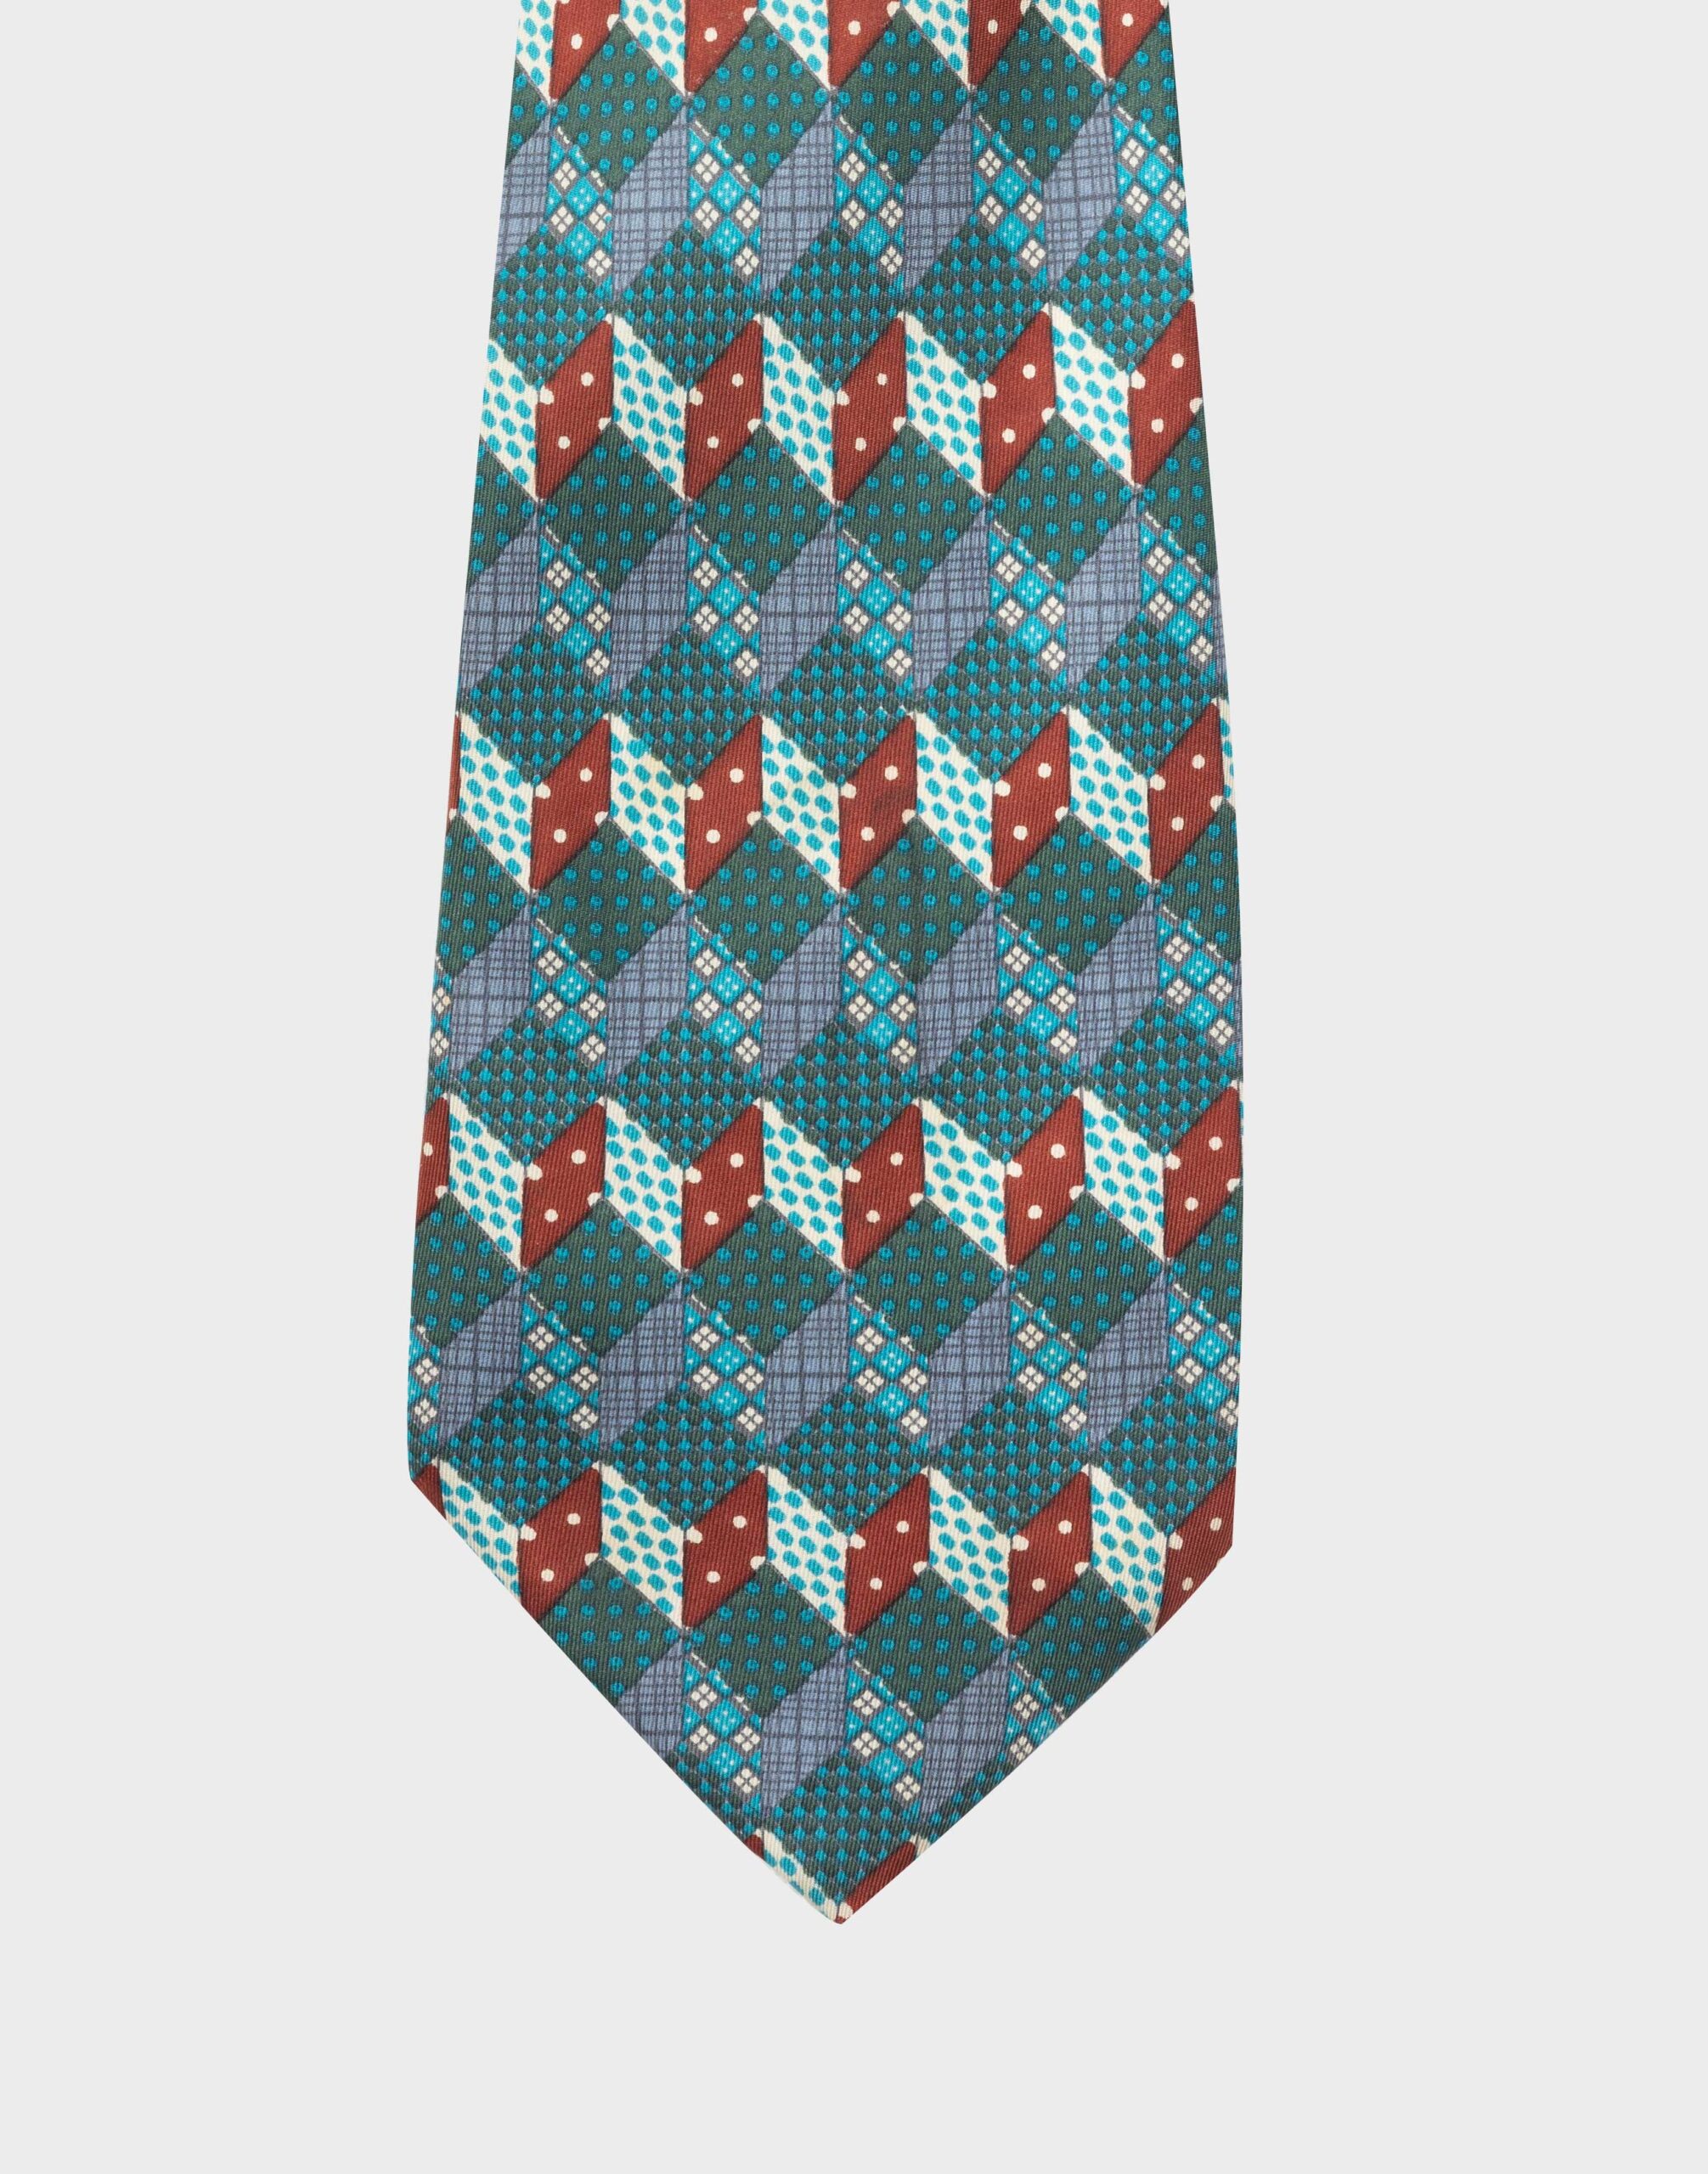 silk tie with green and red cube pattern